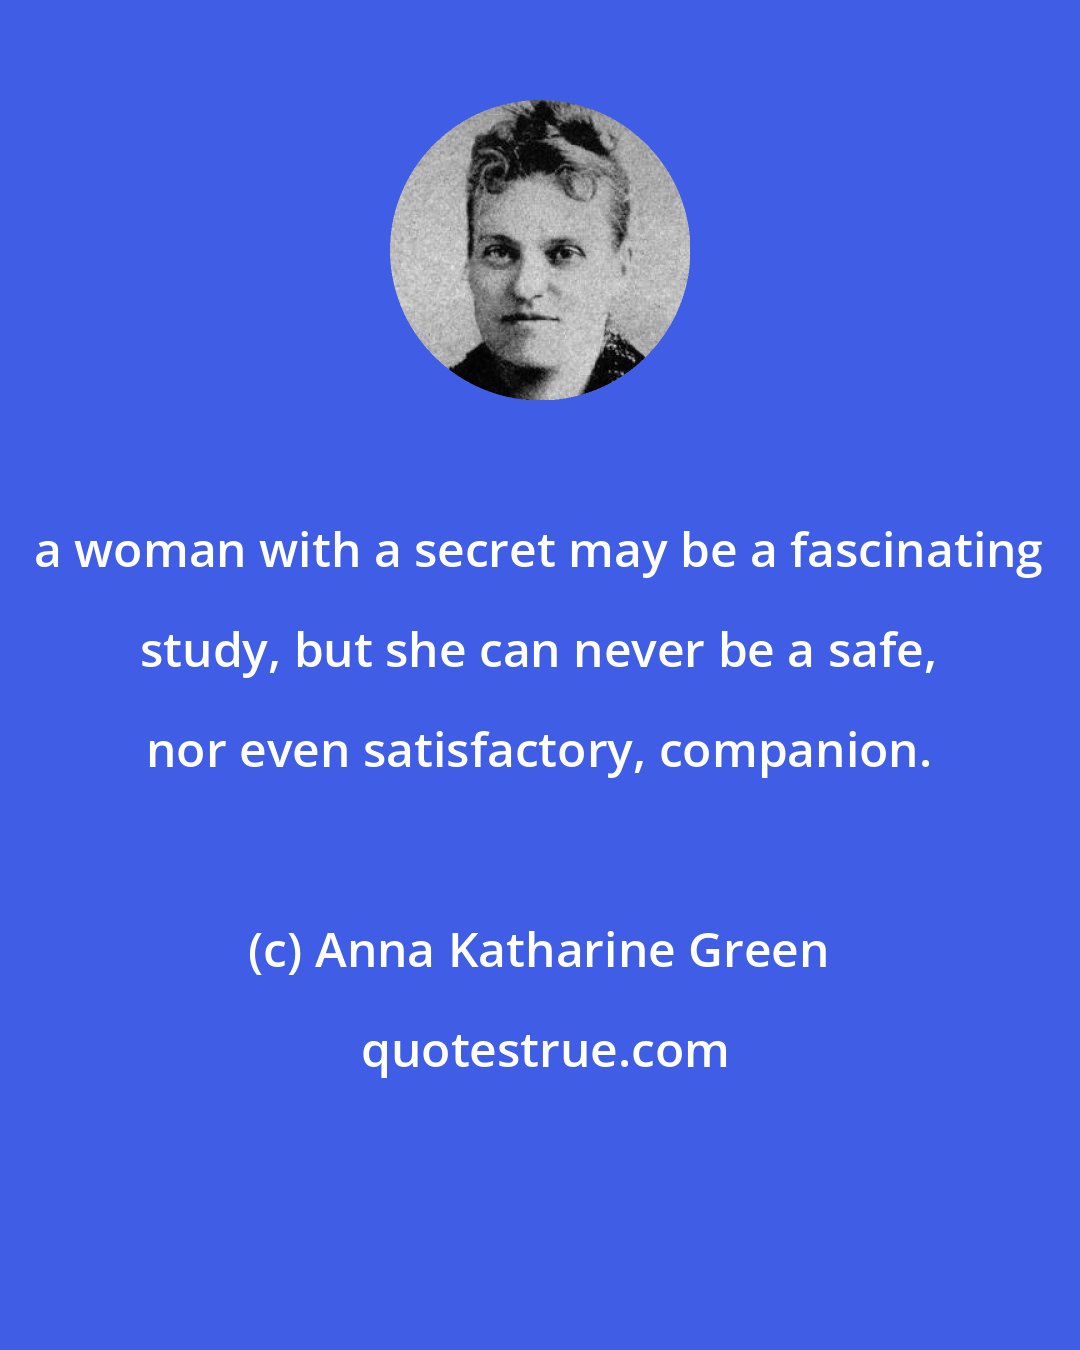 Anna Katharine Green: a woman with a secret may be a fascinating study, but she can never be a safe, nor even satisfactory, companion.